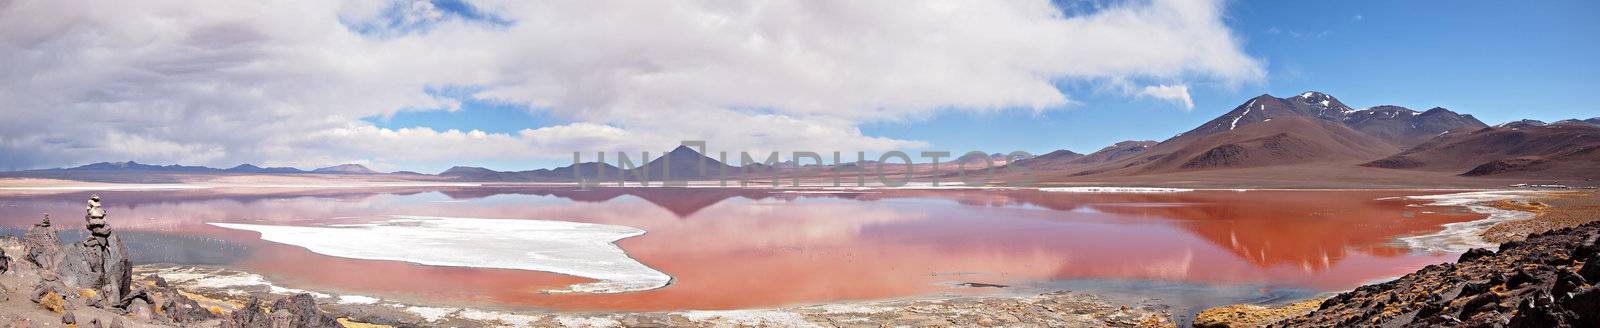 Panorama of the Red Lagoon, or Laguna Colorada, on the Altiplano near Uyuni inside Eduardo Avaroa National Reserve in Bolivia at 4300 m above sea level.  The red color of the water is caused by sediments and algae. The white part is borax salt.